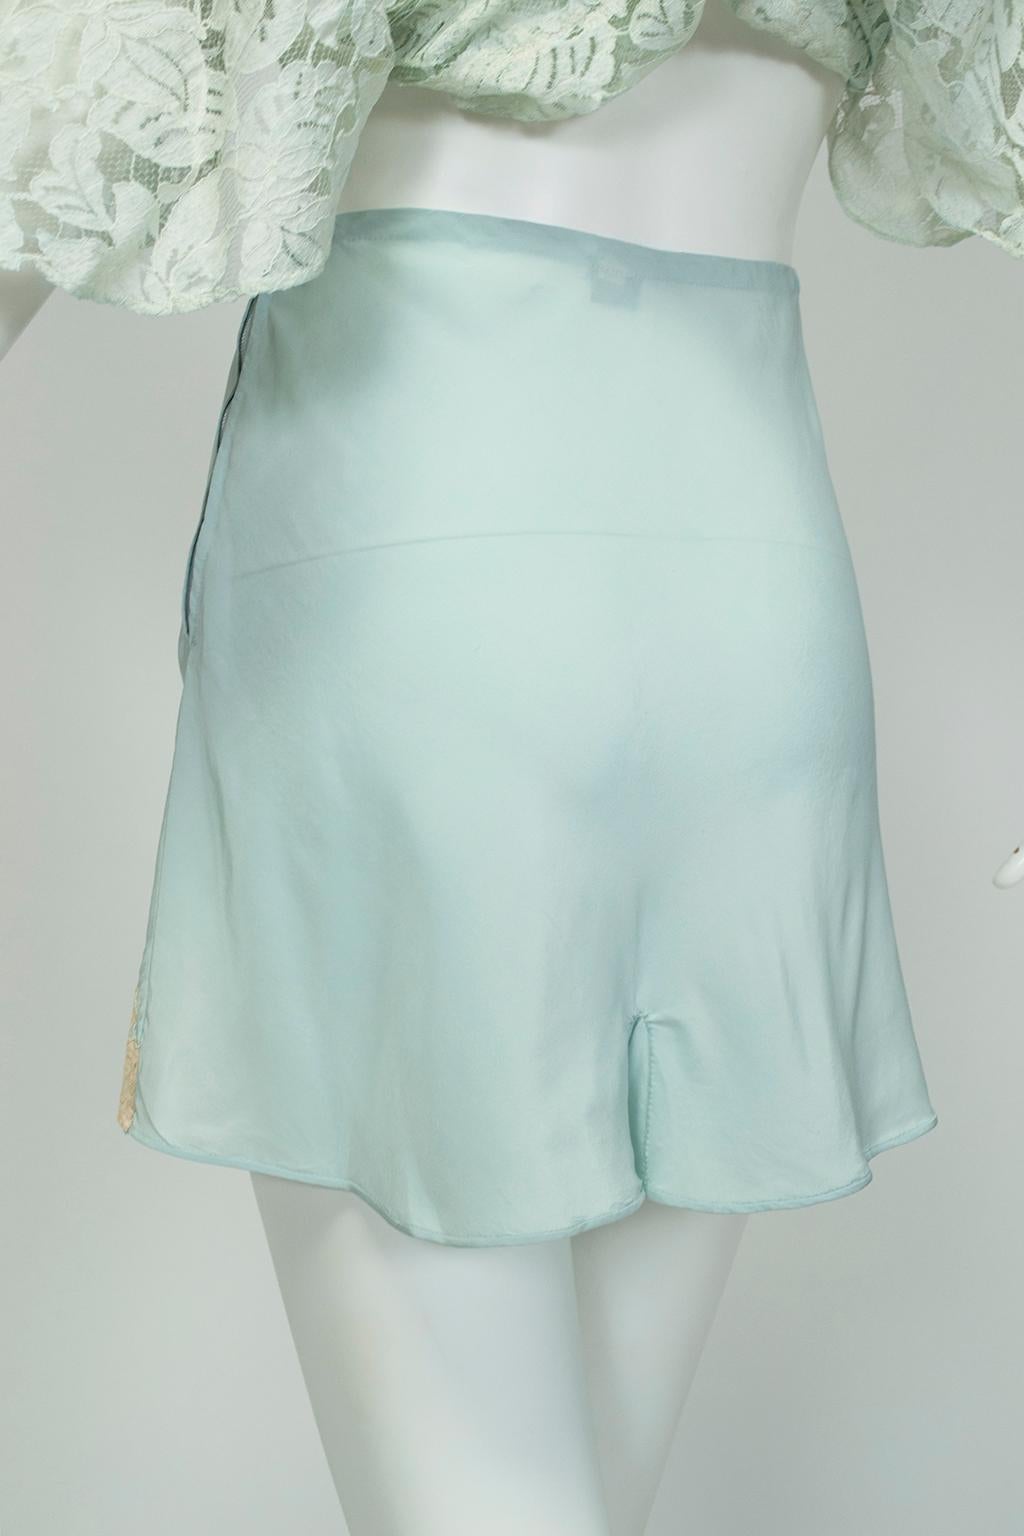 Gray Hand Made Celadon Georgette and Lace Tap Panties with Bow Detail, Saks–S, 1940s